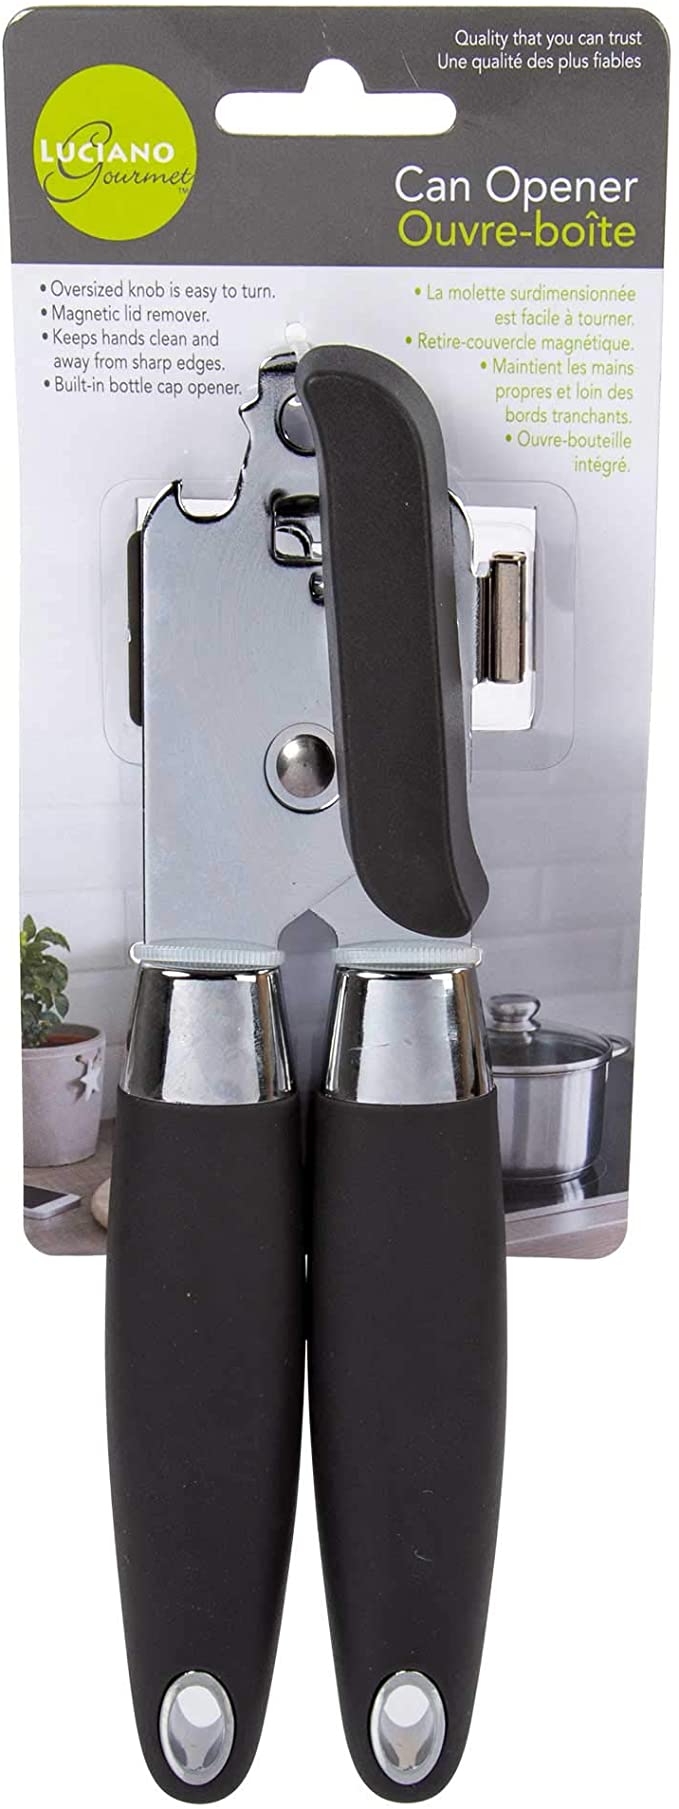 LUCIANO GOURMET Can Opener - 70595